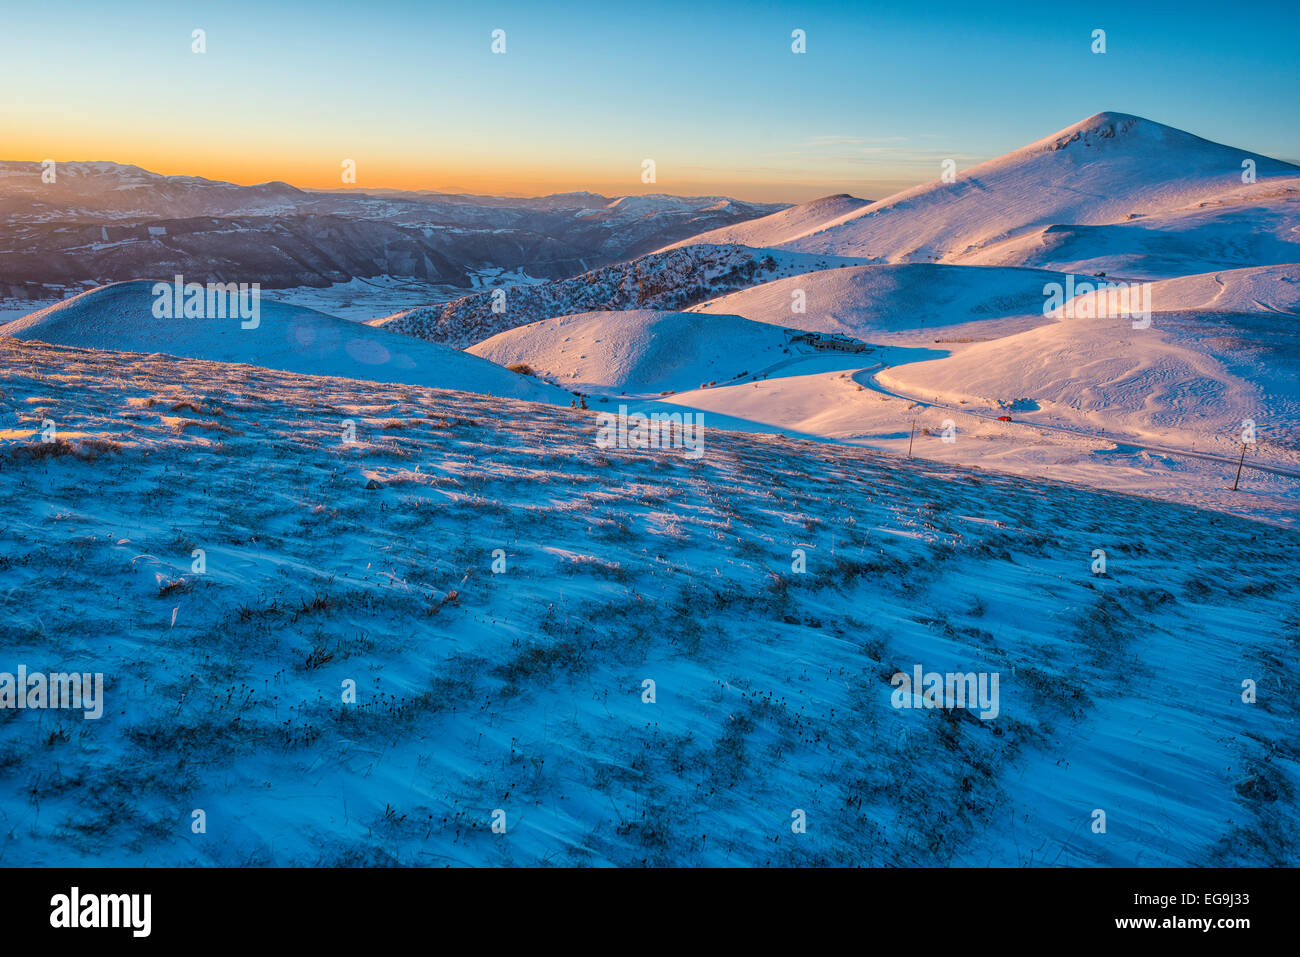 Mountains at sunset in winter, Sibillini Mountains National Park, Umbria, Italy Stock Photo